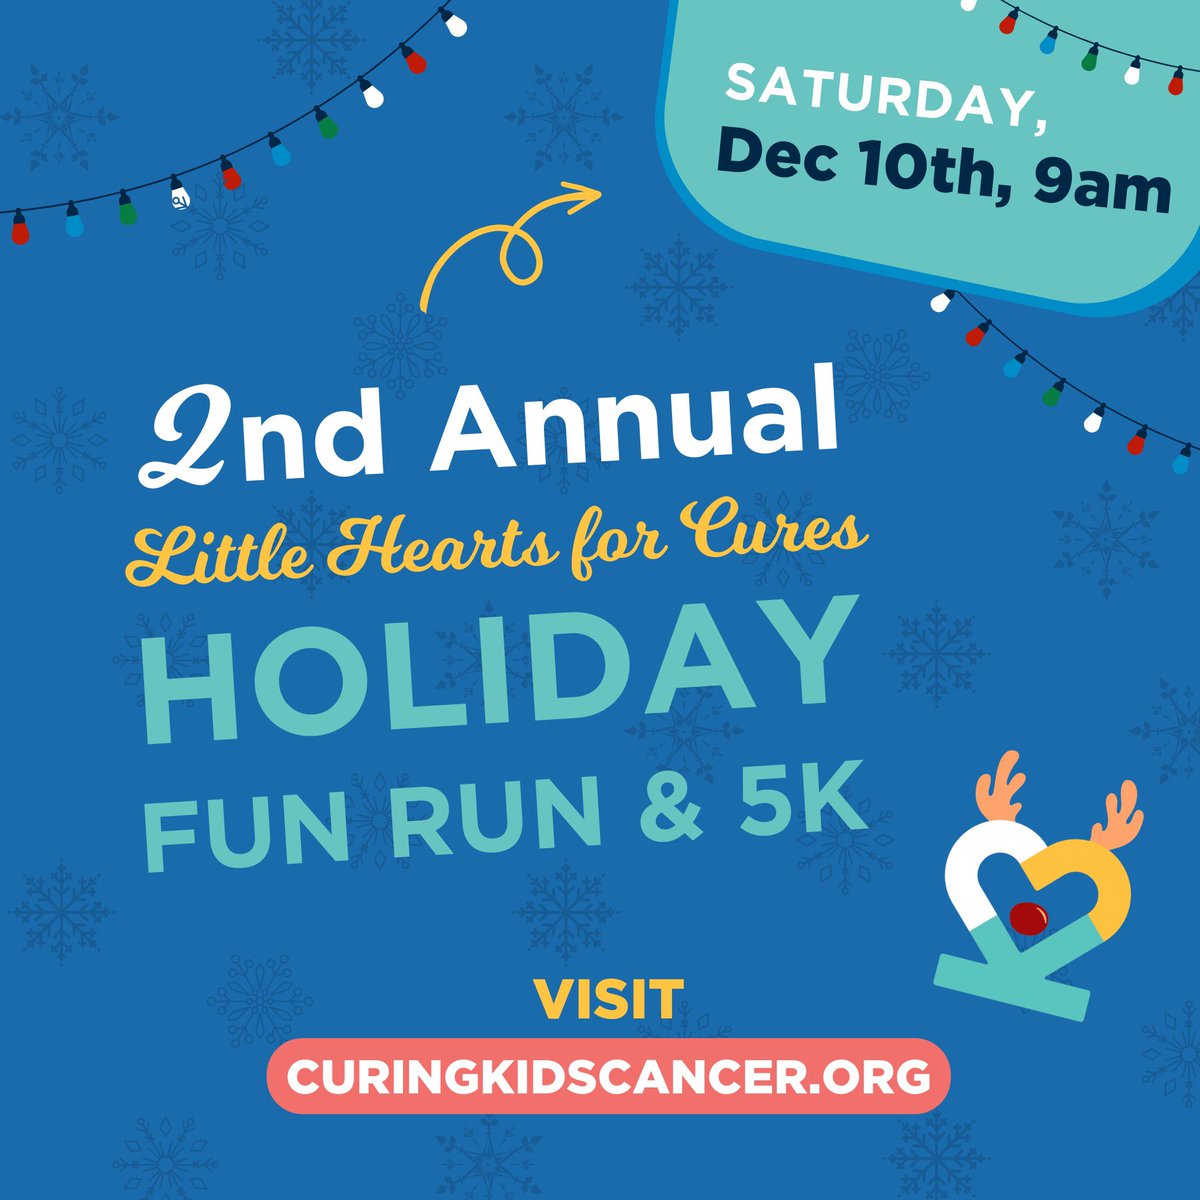 It’s almost time for the Little Hearts Fun Run & 5K! Join us on December 10th at Savannah Rapids Pavilion for a day of community and holiday fun. Tickets and sponsorships available at curingkidscancer.org/events/littler…